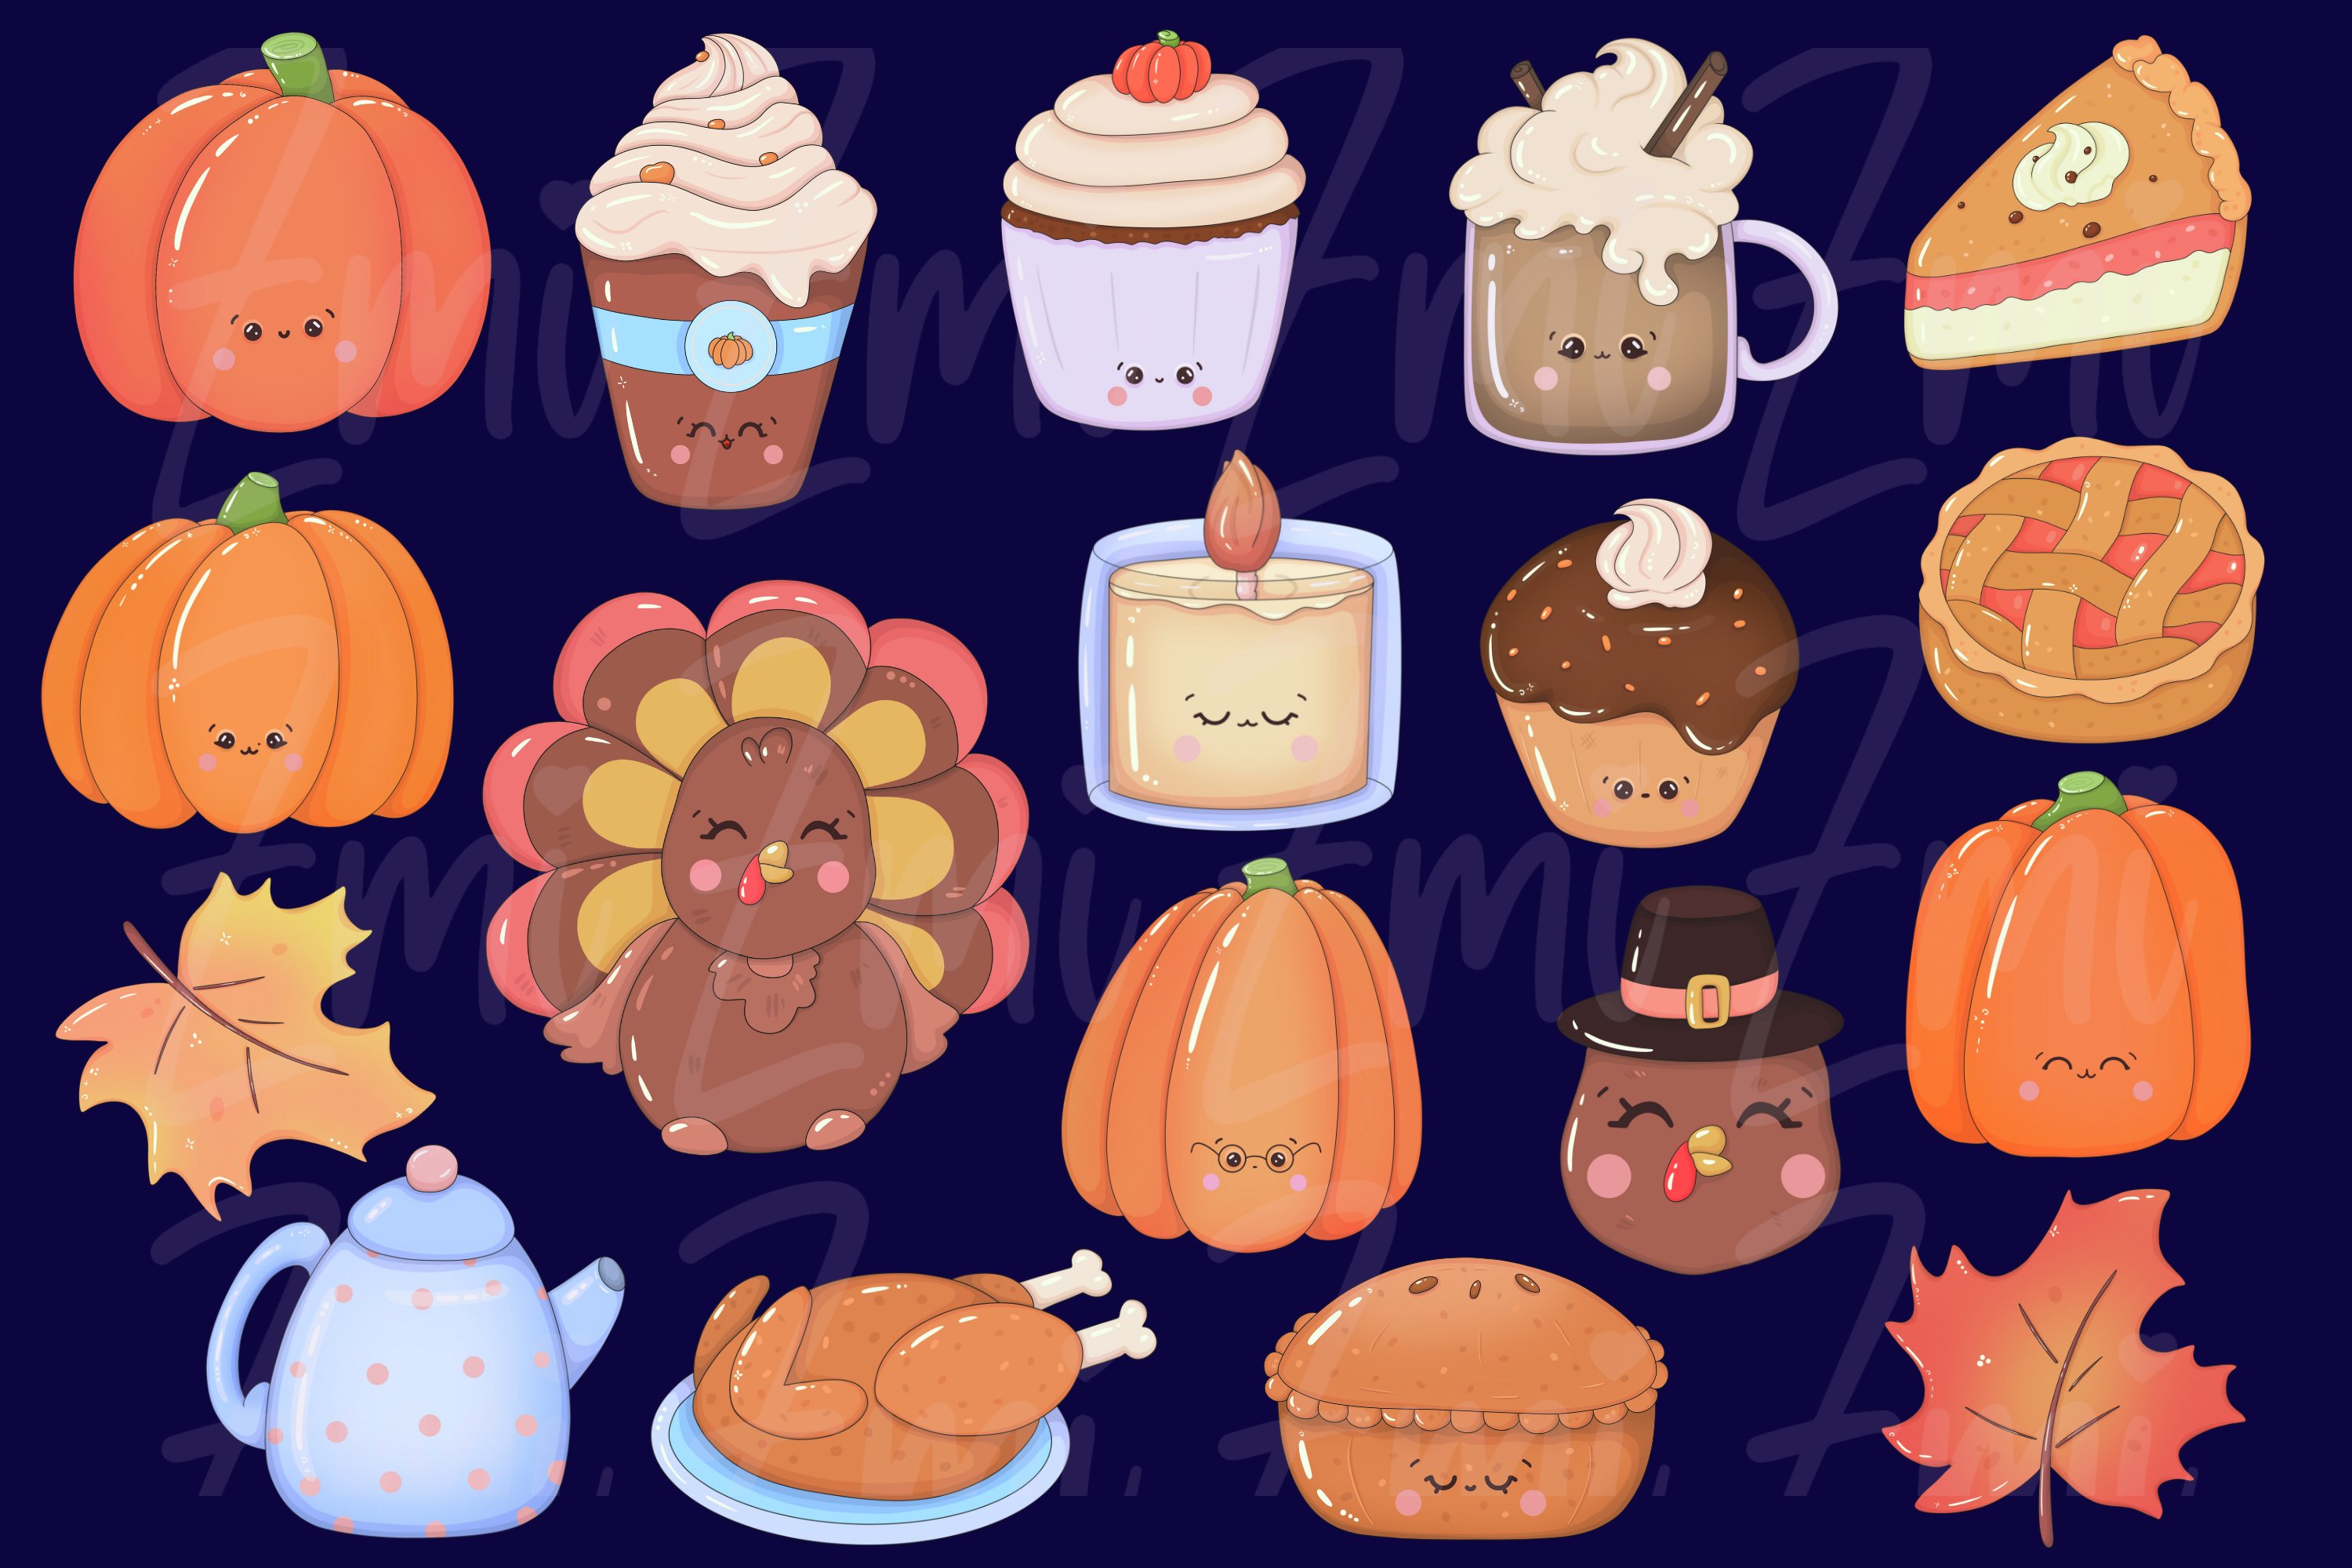 Colorful set of cute kawaii autumn illustrations on a blue background.